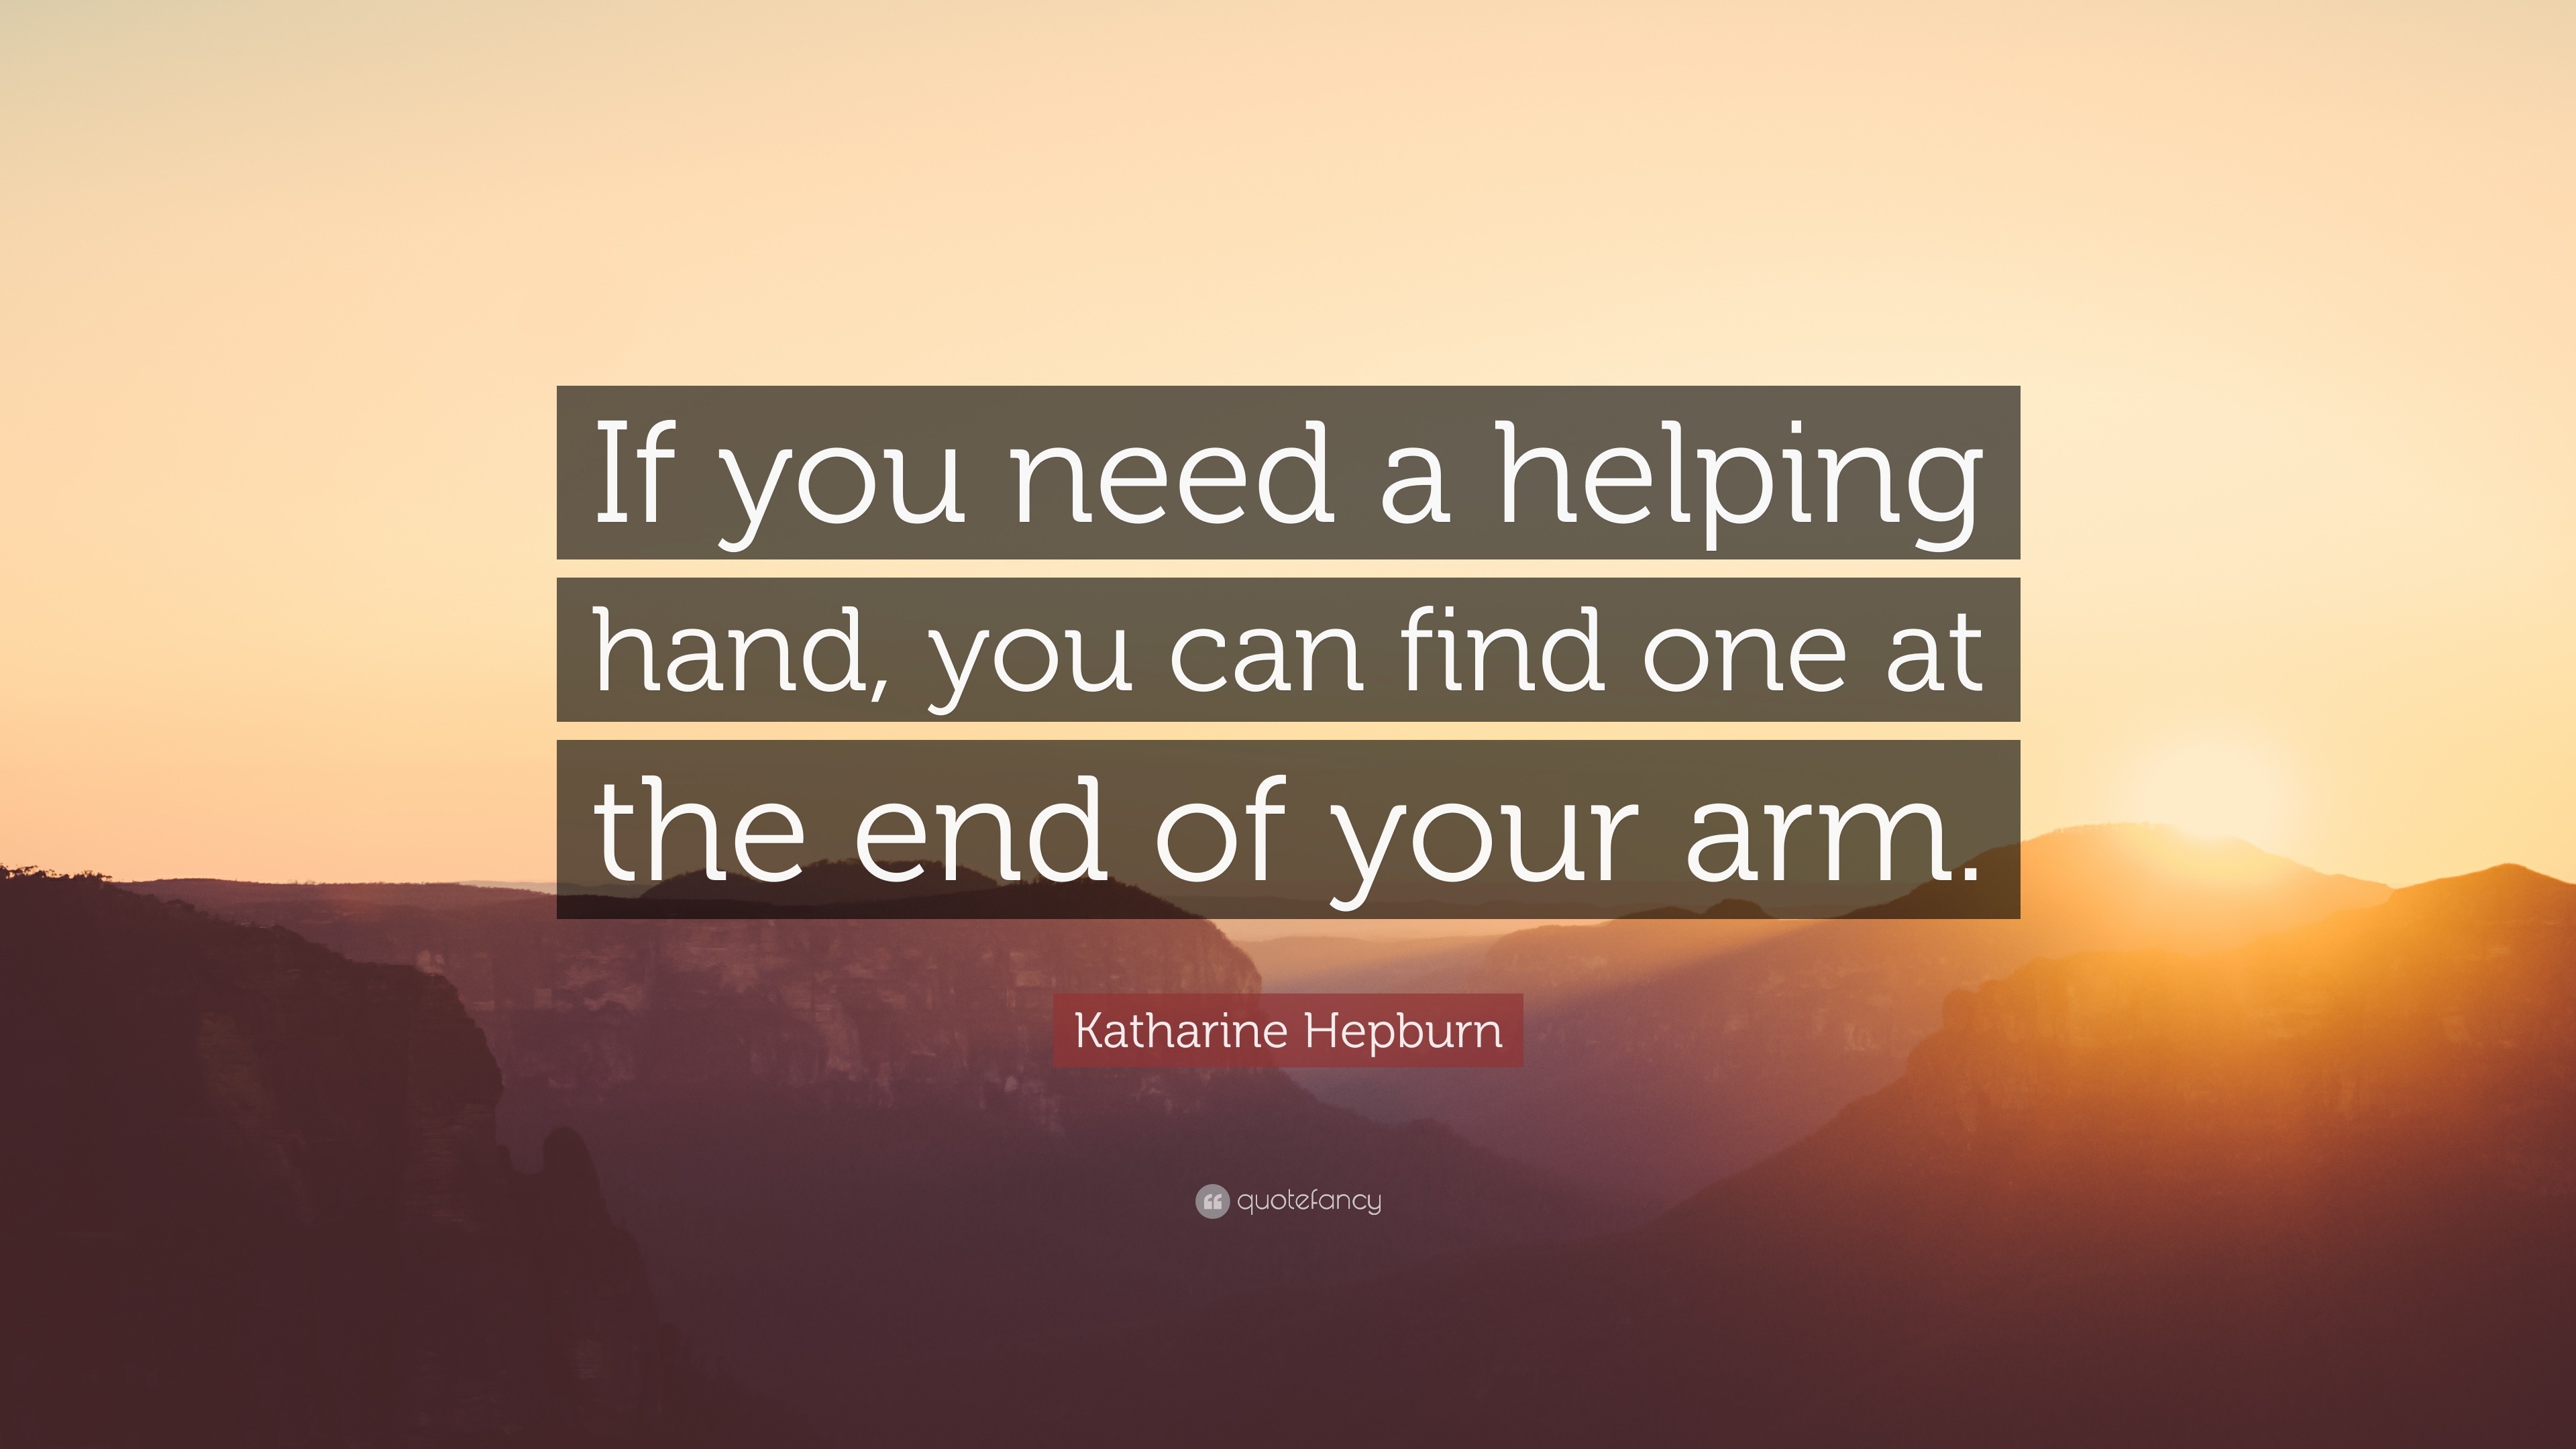 Katharine Hepburn Quote: “If you need a helping hand, you can find one ...